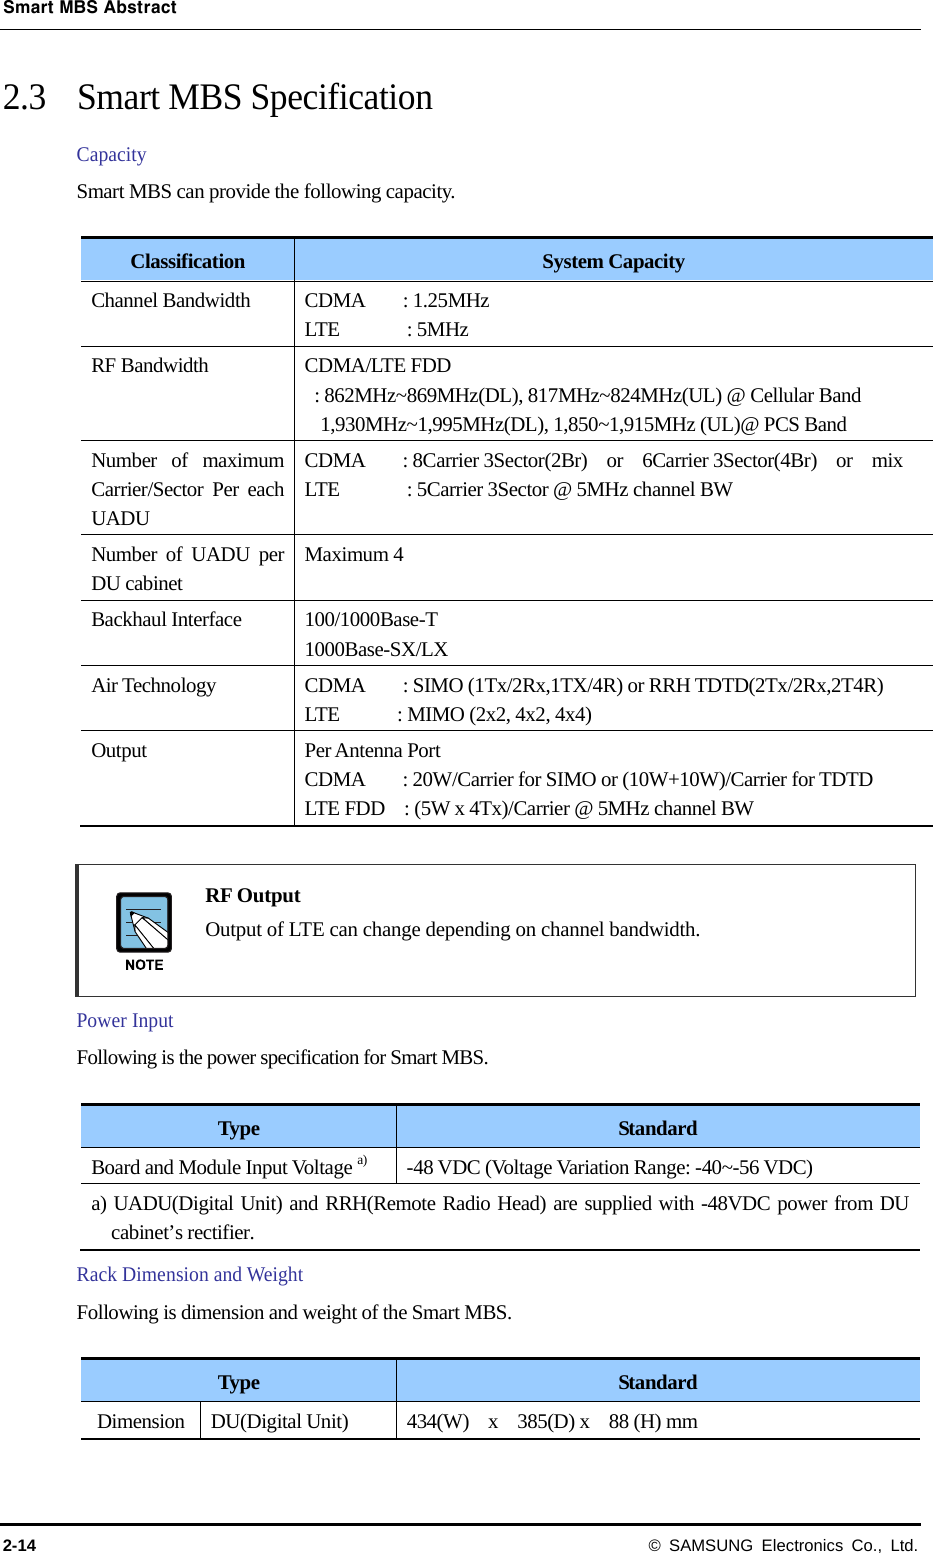 Smart MBS Abstract 2-14 © SAMSUNG Electronics Co., Ltd. 2.3  Smart MBS Specification   Capacity  Smart MBS can provide the following capacity.  Classification  System Capacity Channel Bandwidth  CDMA    : 1.25MHz LTE       : 5MHz RF Bandwidth  CDMA/LTE FDD   : 862MHz~869MHz(DL), 817MHz~824MHz(UL) @ Cellular Band 1,930MHz~1,995MHz(DL), 1,850~1,915MHz (UL)@ PCS Band Number of maximum Carrier/Sector Per each UADU CDMA    : 8Carrier 3Sector(2Br)  or  6Carrier 3Sector(4Br)  or  mix LTE       : 5Carrier 3Sector @ 5MHz channel BW Number of UADU per DU cabinet Maximum 4 Backhaul Interface  100/1000Base-T 1000Base-SX/LX Air Technology  CDMA    : SIMO (1Tx/2Rx,1TX/4R) or RRH TDTD(2Tx/2Rx,2T4R)  LTE      : MIMO (2x2, 4x2, 4x4) Output Per Antenna Port  CDMA        : 20W/Carrier for SIMO or (10W+10W)/Carrier for TDTD LTE FDD    : (5W x 4Tx)/Carrier @ 5MHz channel BW   RF Output     Output of LTE can change depending on channel bandwidth.  Power Input   Following is the power specification for Smart MBS.  Type  Standard Board and Module Input Voltage a) -48 VDC (Voltage Variation Range: -40~-56 VDC) a) UADU(Digital Unit) and RRH(Remote Radio Head) are supplied with -48VDC power from DU cabinet’s rectifier. Rack Dimension and Weight Following is dimension and weight of the Smart MBS.  Type  Standard Dimension  DU(Digital Unit)  434(W)  x  385(D) x  88 (H) mm 